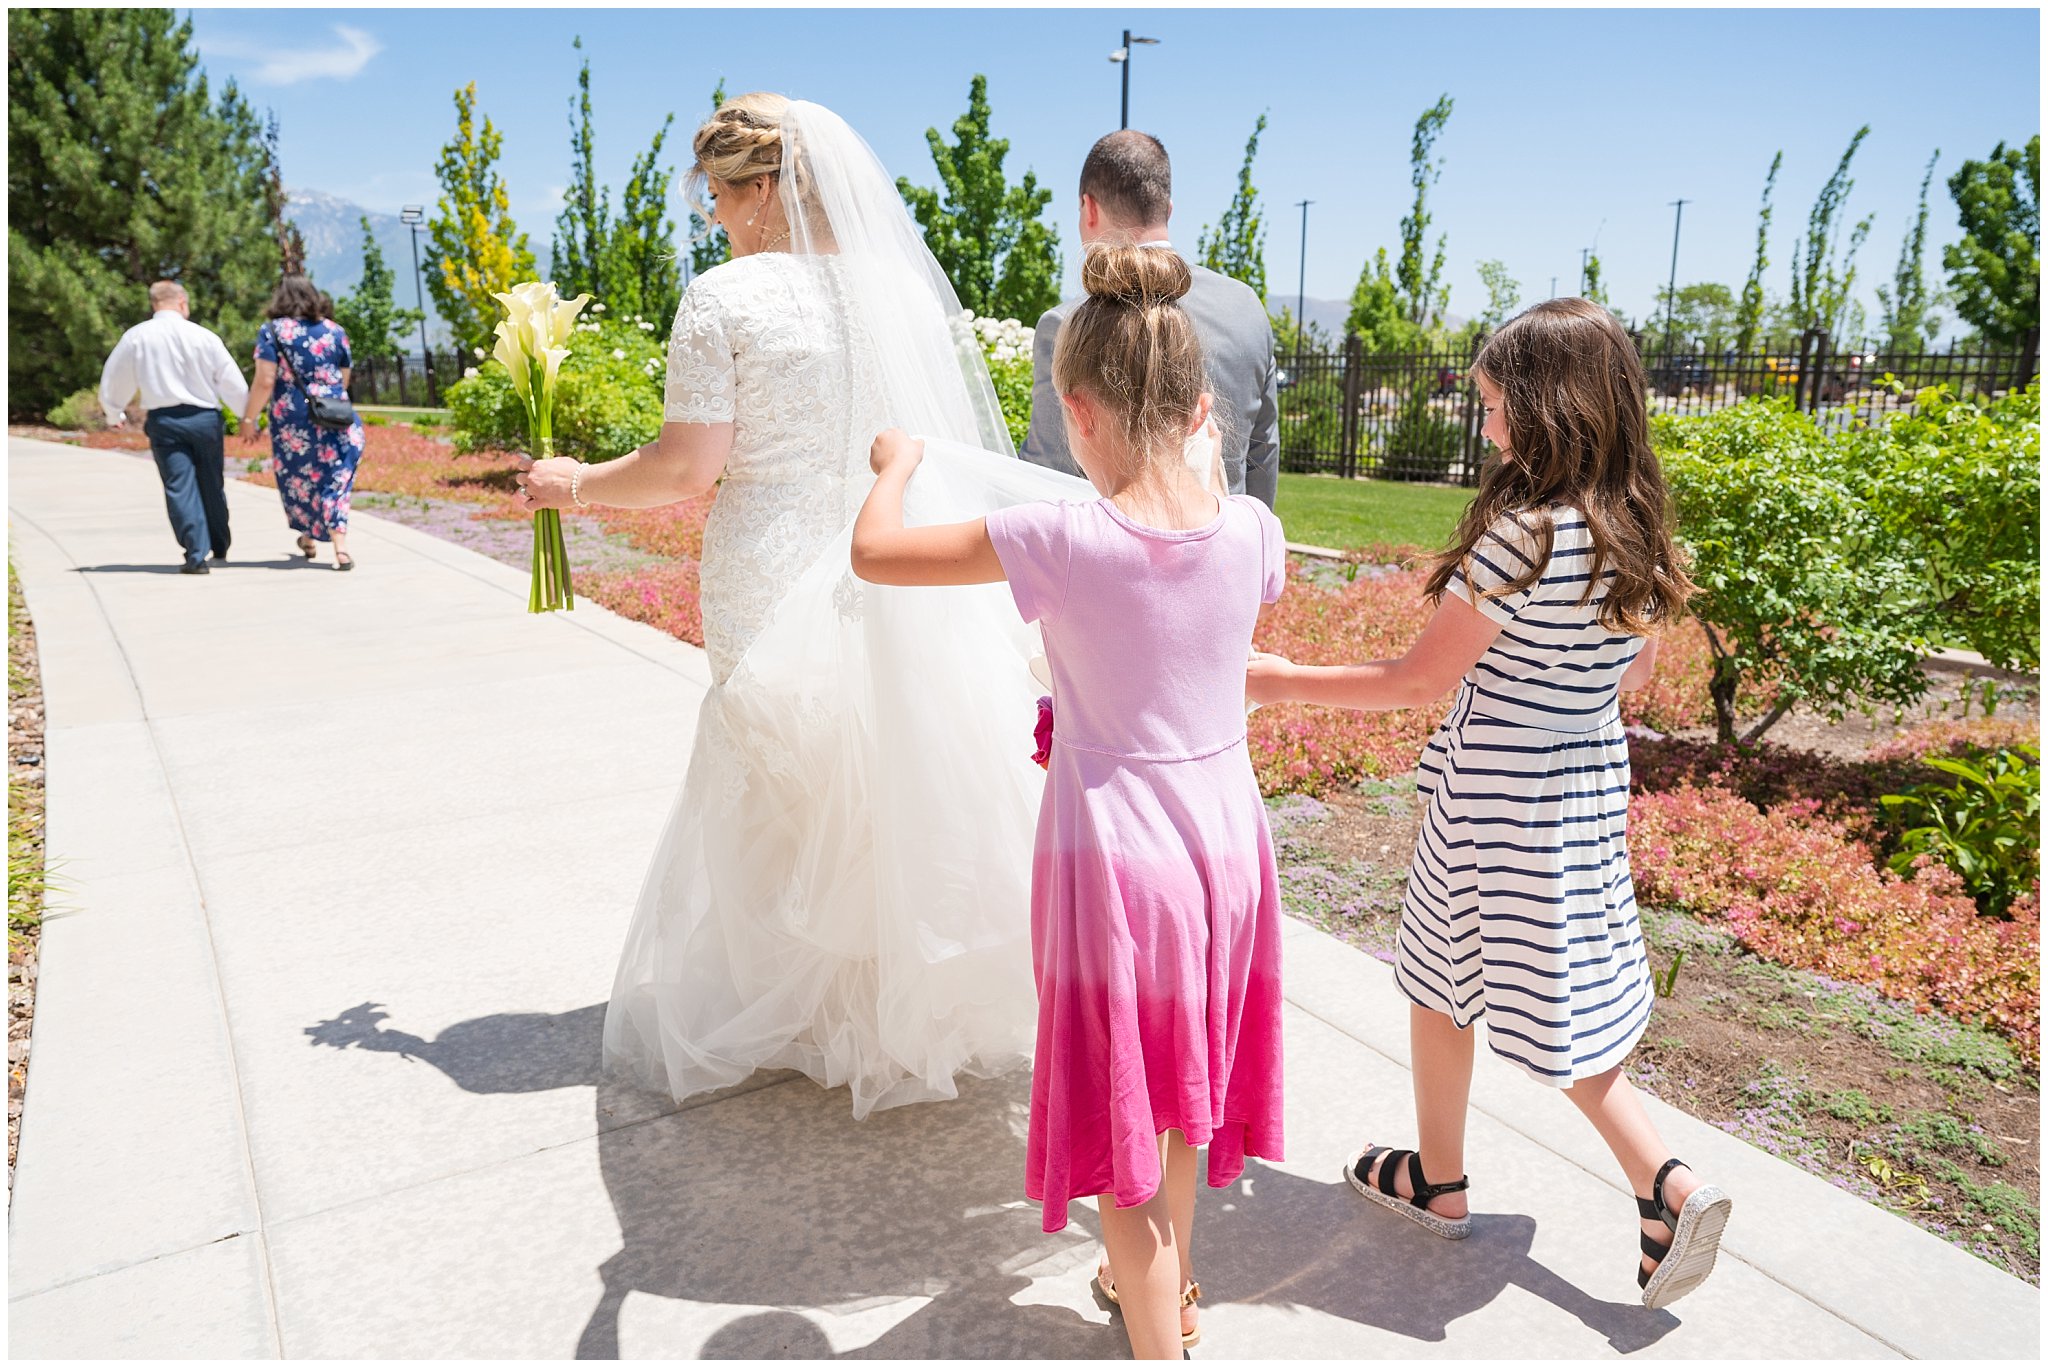 Girls help bride with dress | Oquirrh Mountain Temple and Millennial Falls Wedding | Jessie and Dallin Photography